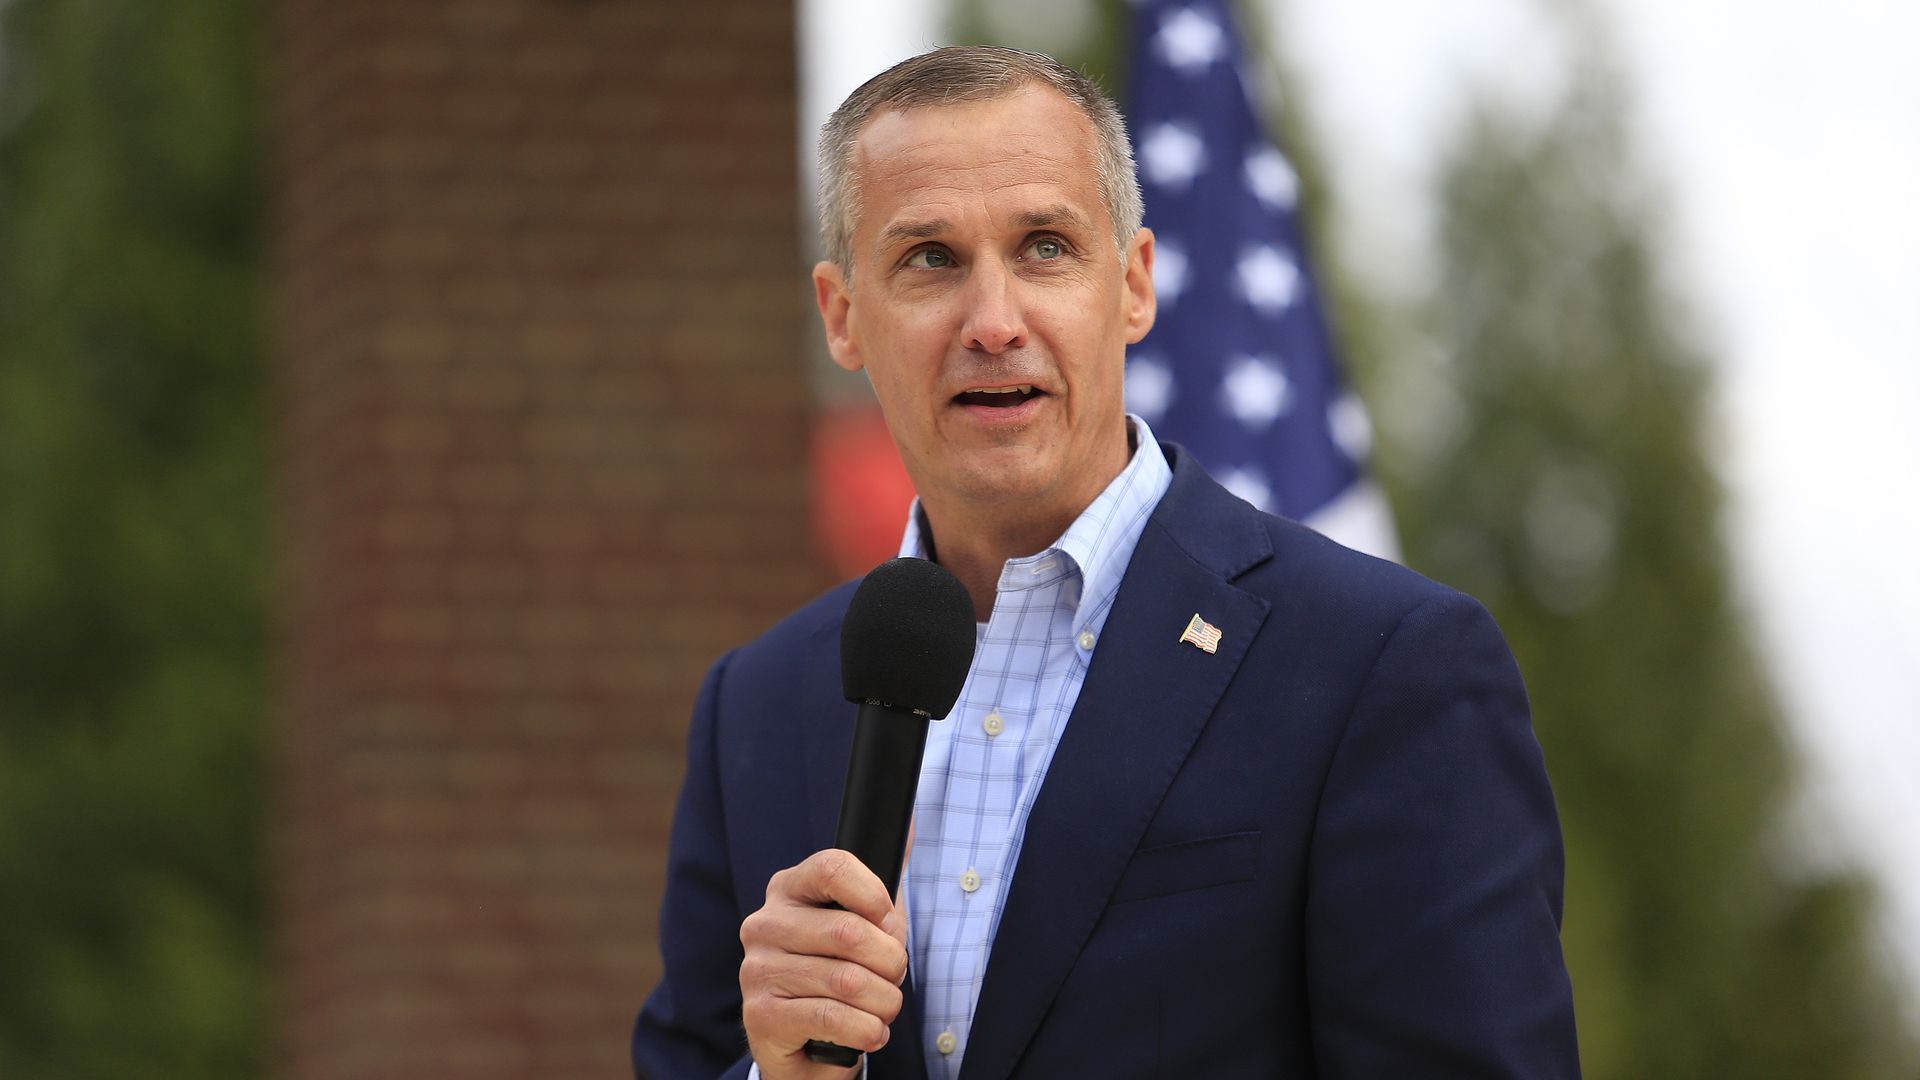 Corey Lewandowski speaks to the crowd during a tour at The Bowl at Sugar Hill on January 3rd, 2021 in Sugar Hill, Georgia.